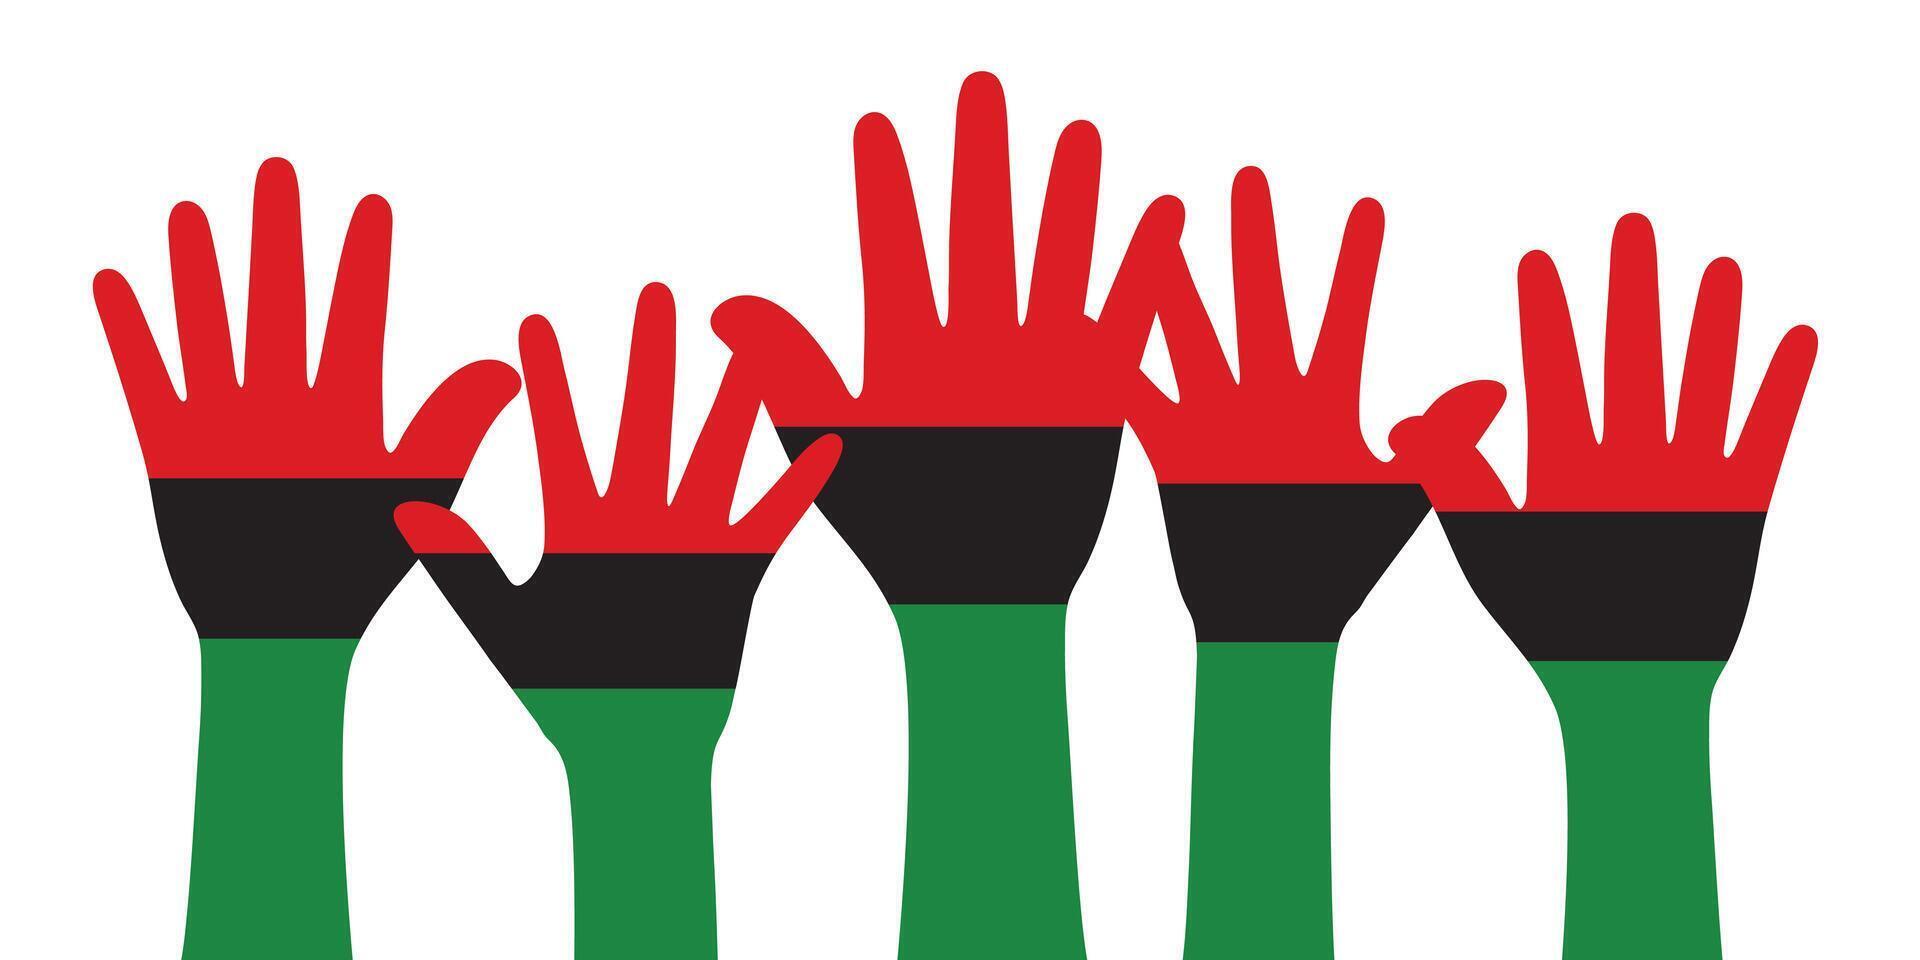 Silhouette of red, black and green colored hands as the colors of the Pan-African flag. Flat vector illustration. For Juneteenth and Black History Month.